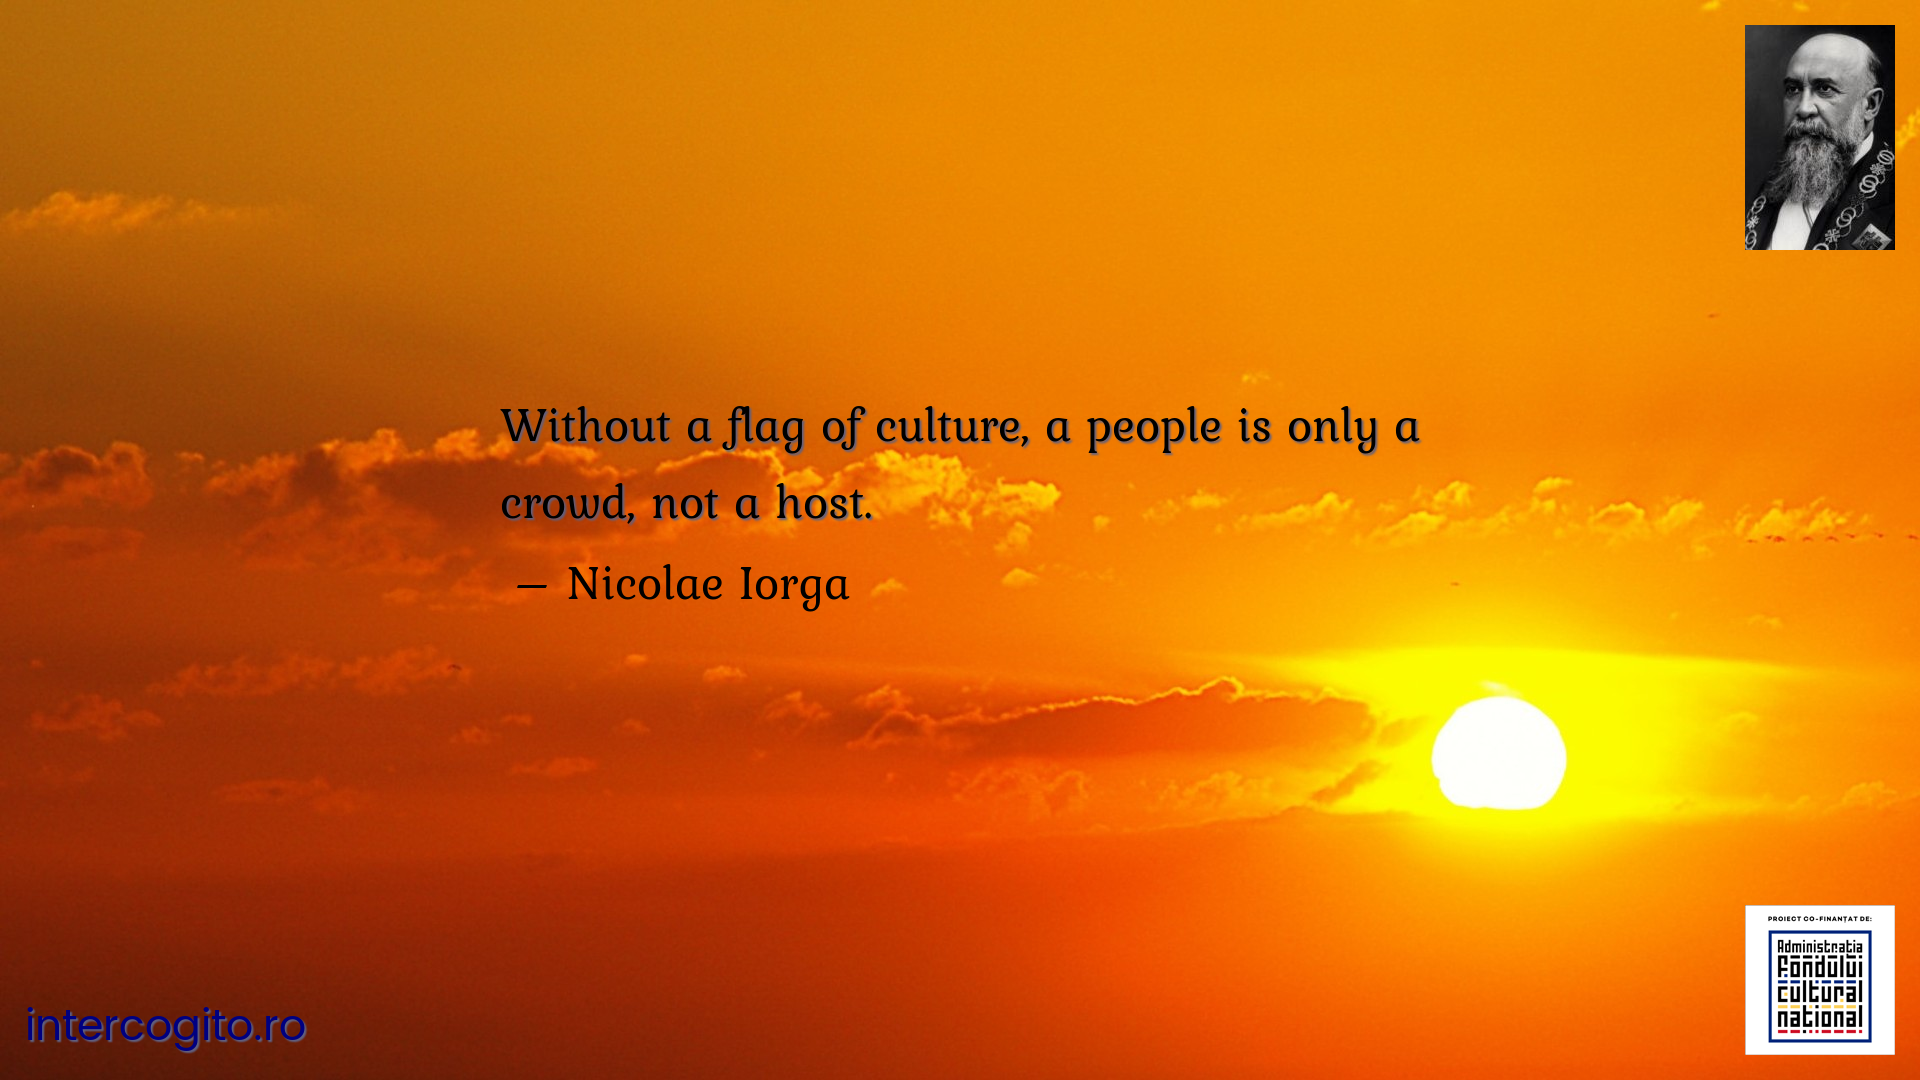 Without a flag of culture, a people is only a crowd, not a host.